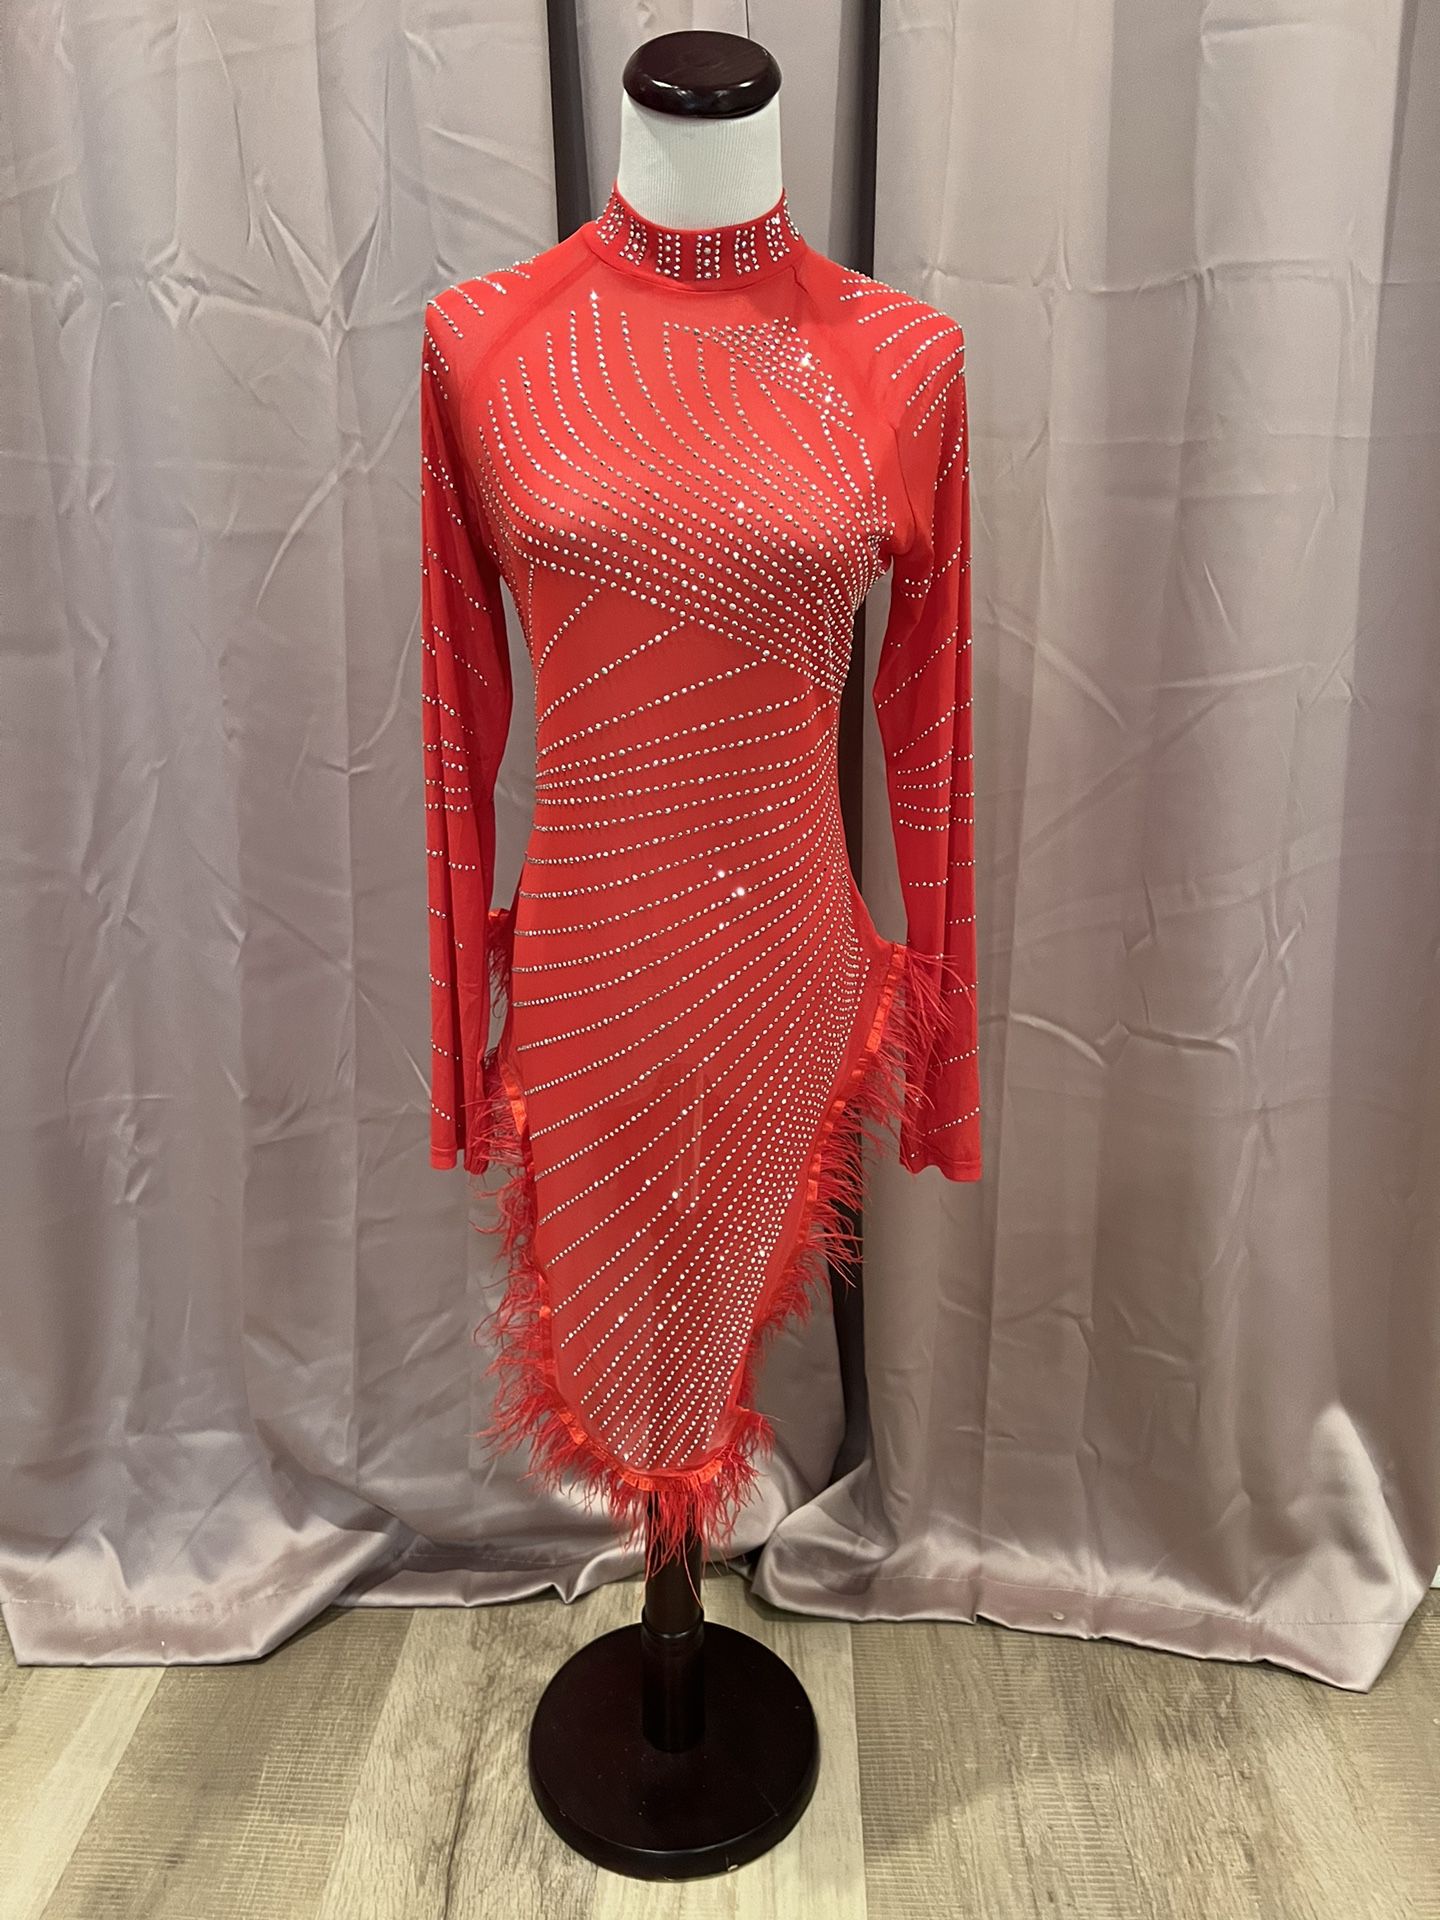 Sheer Red Party Dress With Rhinestones 